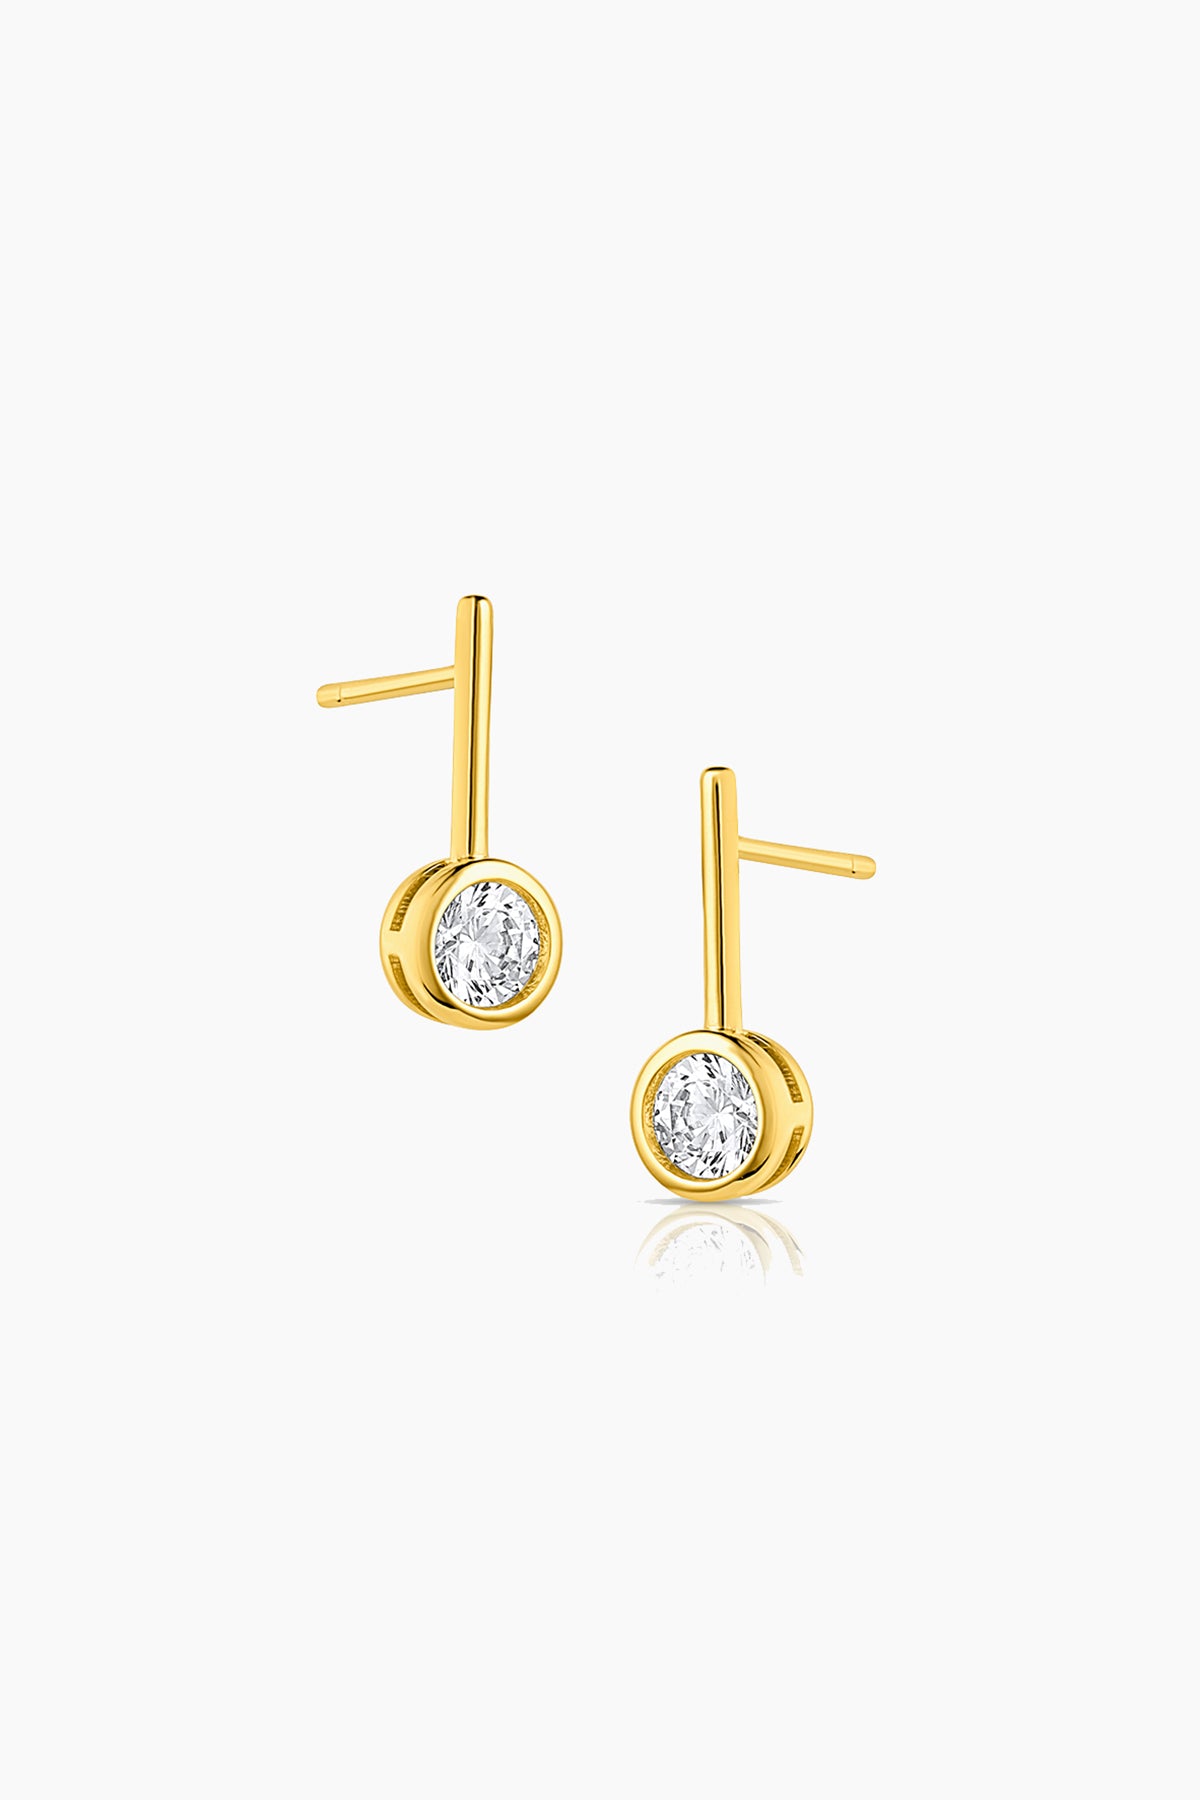 A pair of NOEMI earrings by Thatch with diamonds.-35526314655937